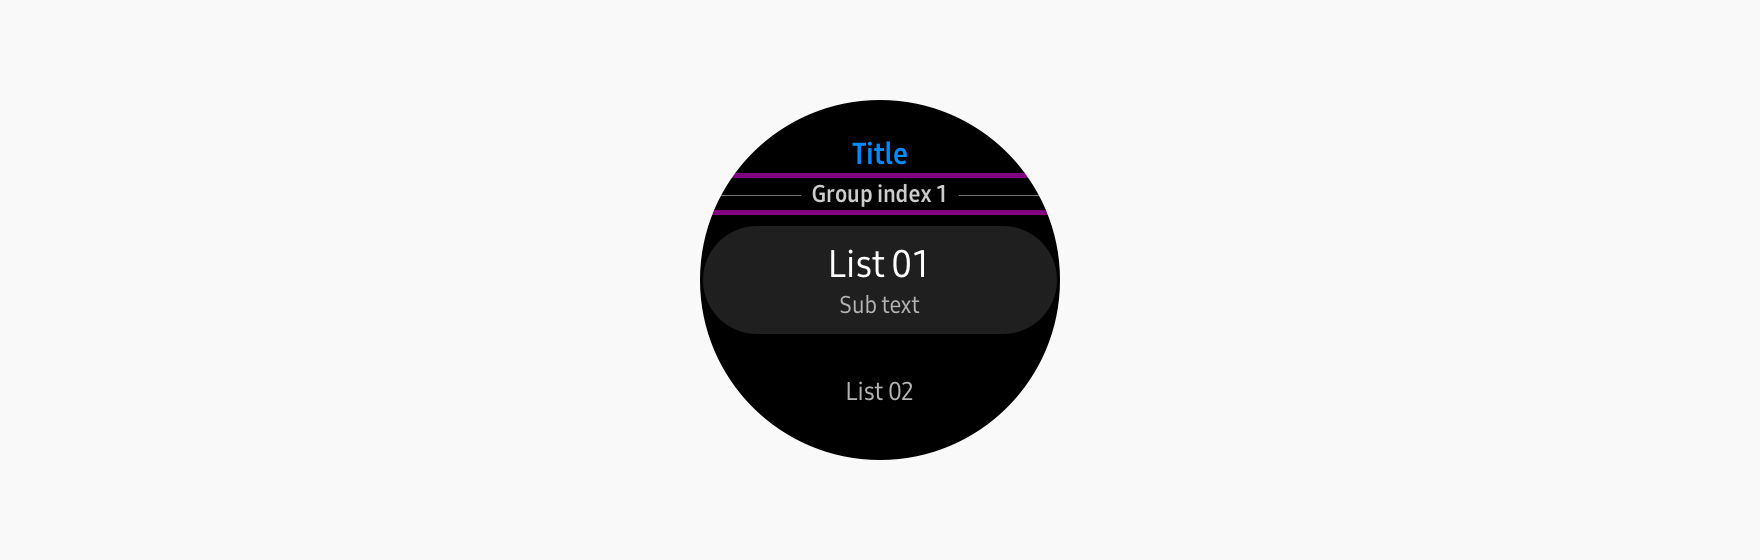 A group index divides list items into groups.